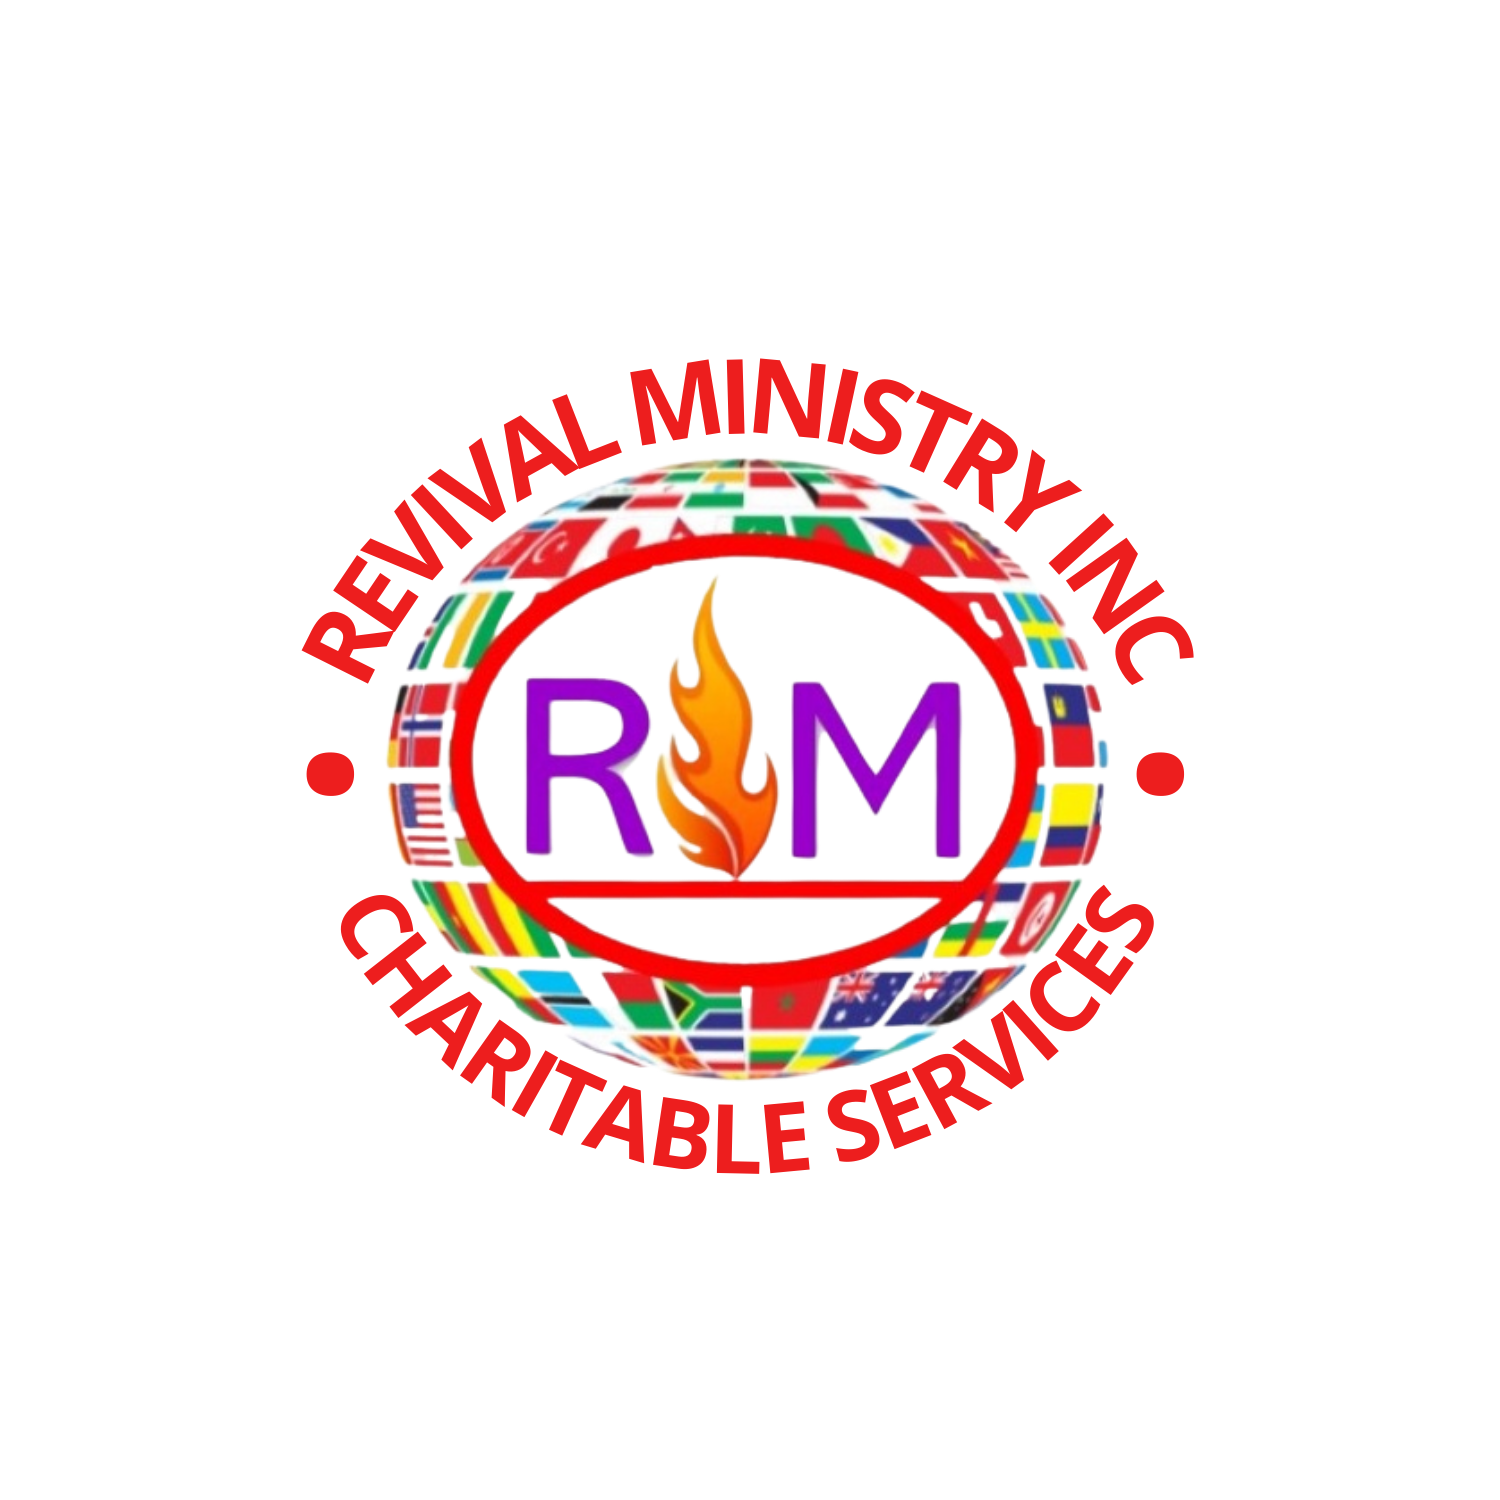 Revival Ministry Inc.